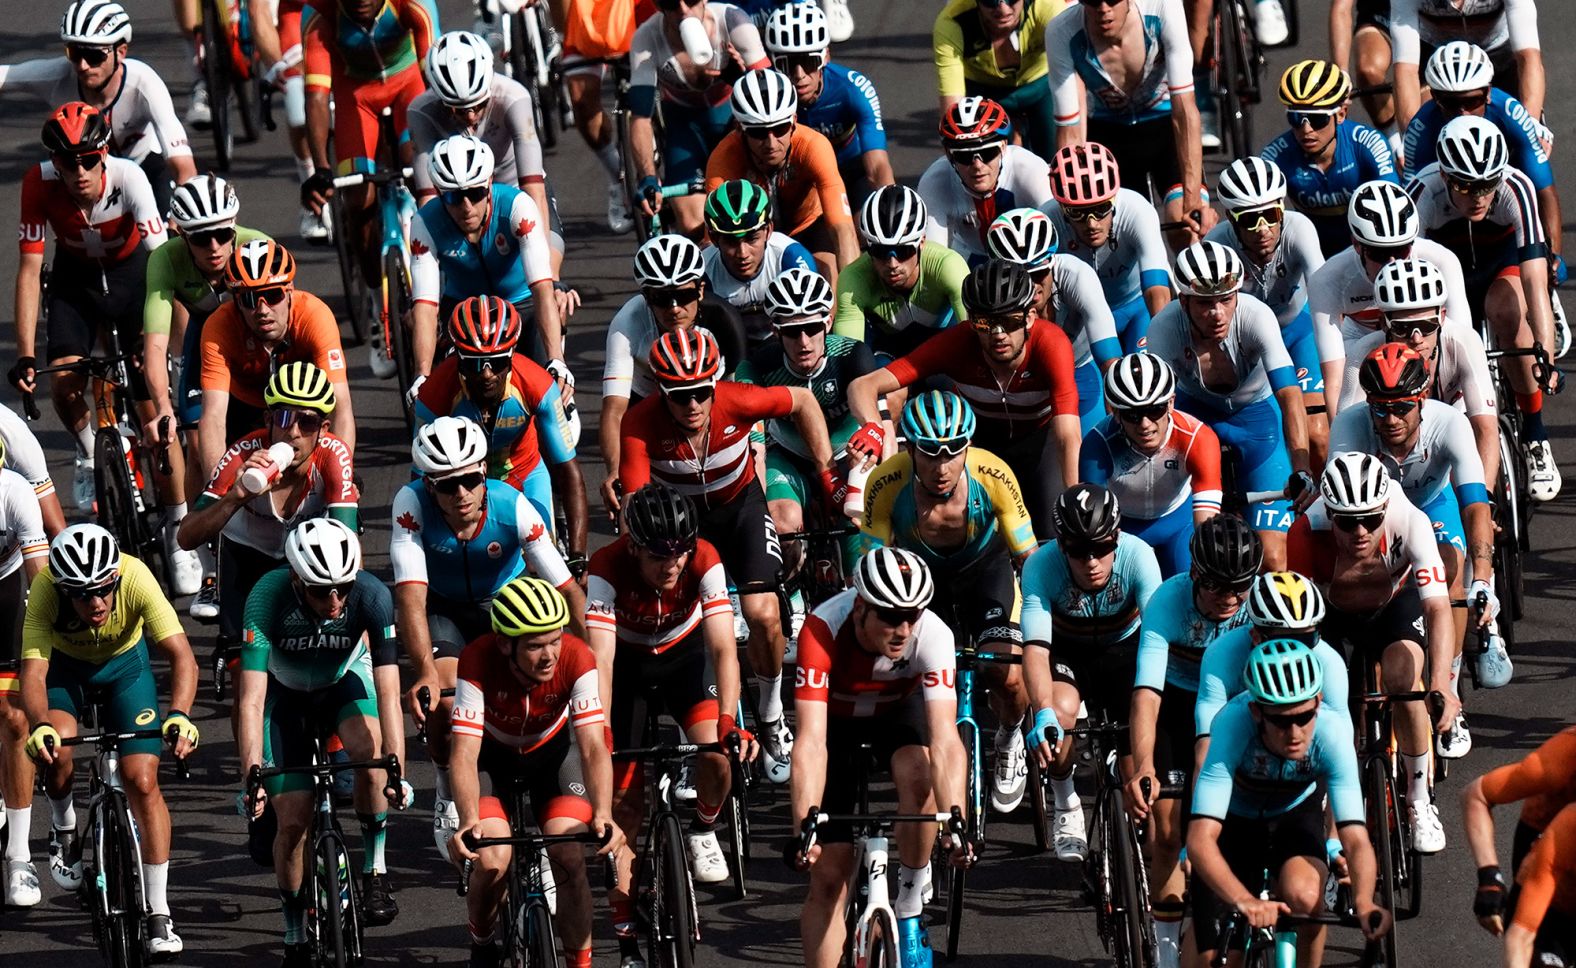 Cyclists compete in the men's road race on July 24. <a href="index.php?page=&url=https%3A%2F%2Fedition.cnn.com%2Fworld%2Flive-news%2Ftokyo-2020-olympics-07-24-21-spt%2Fh_865e6f42d17b1c92f727d4660ae7fa9a" target="_blank">Ecuador's Richard Carapaz</a> won the race after breaking away in the final 10 kilometers.